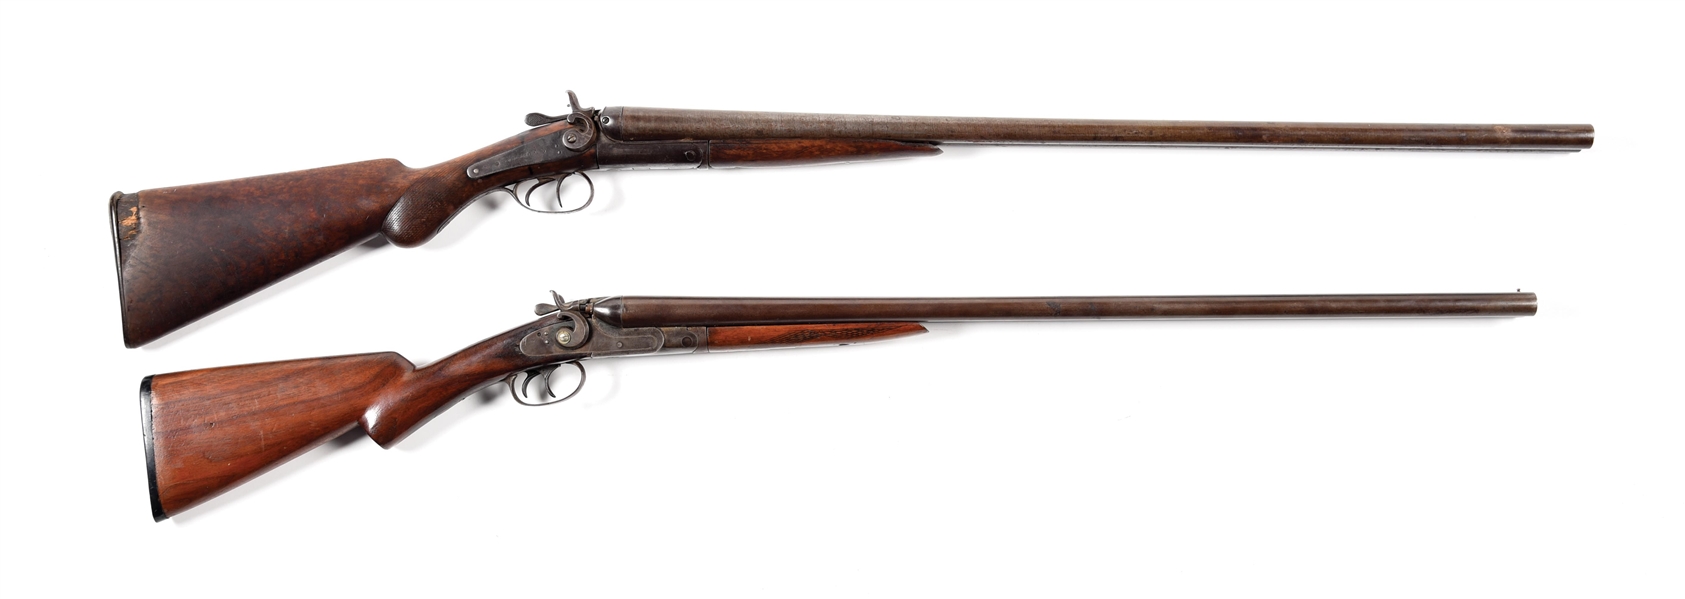 (C) LOT OF 2: W. RICHARDS SIDE BY SIDE HAMMER SHOTGUN AND CENTRAL ARMS CO. SIDE BY SIDE HAMMER SHOTGUN.